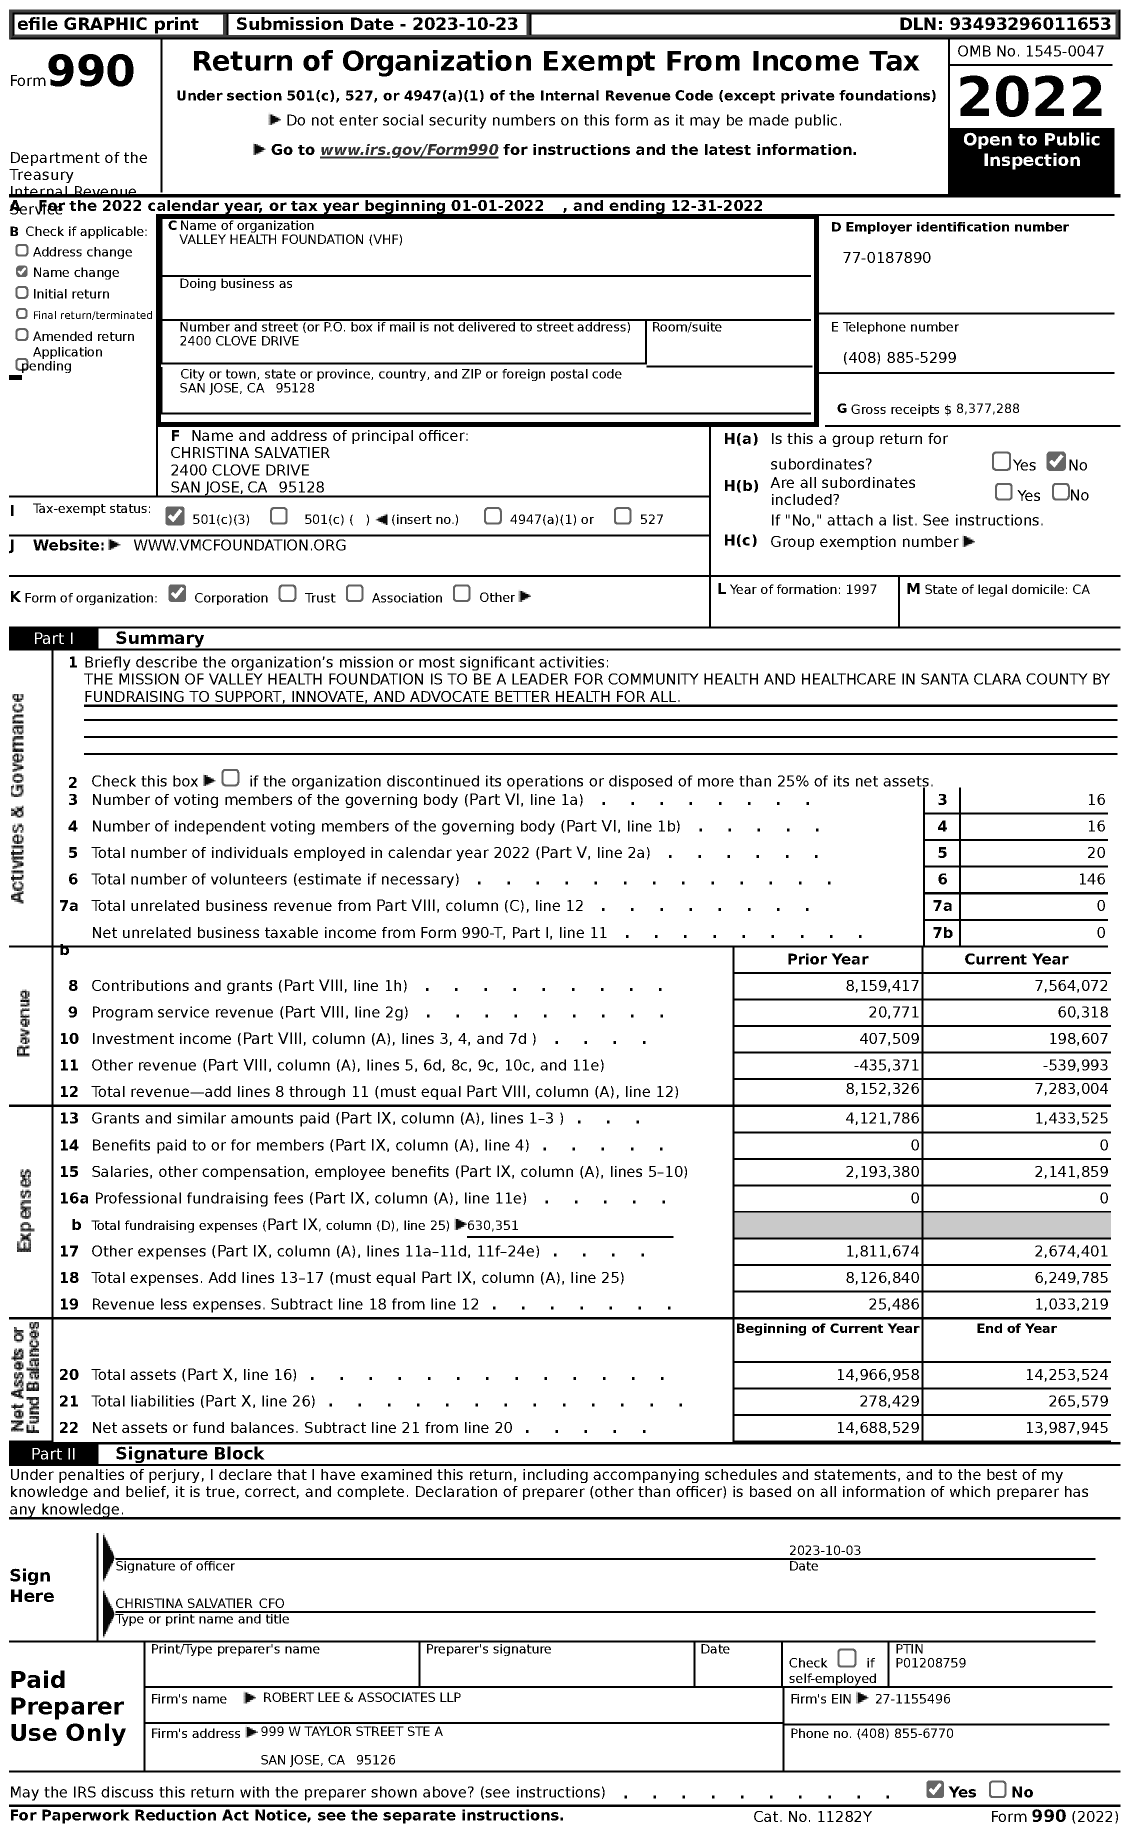 Image of first page of 2022 Form 990 for Valley Health Foundation (VHF)